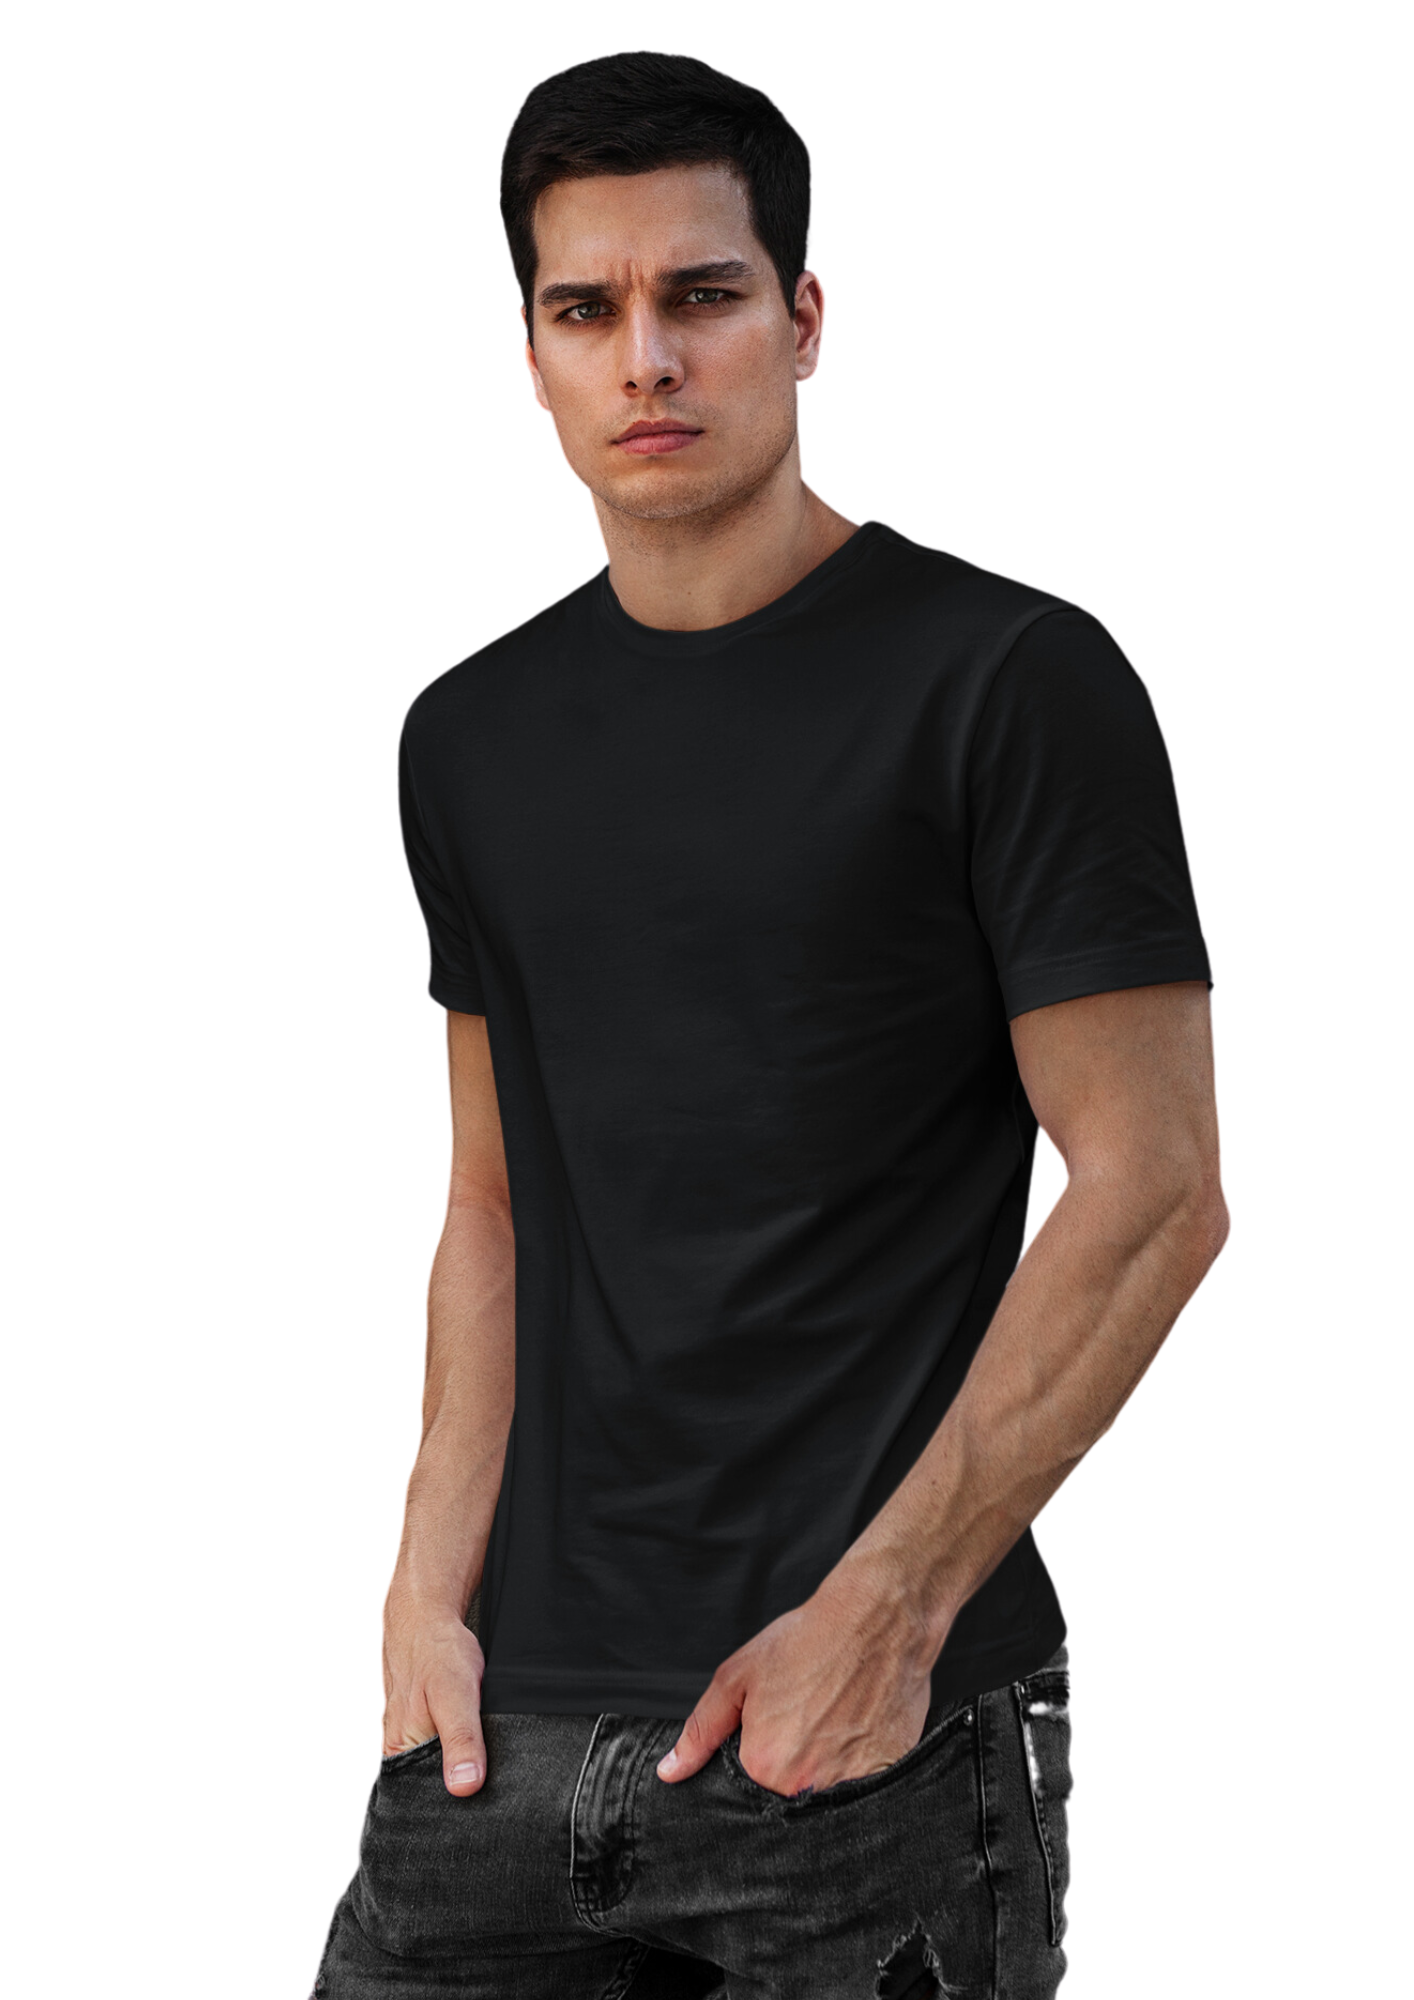 100% Compacted Combed Cotton White, White, Black 3 T-shirts